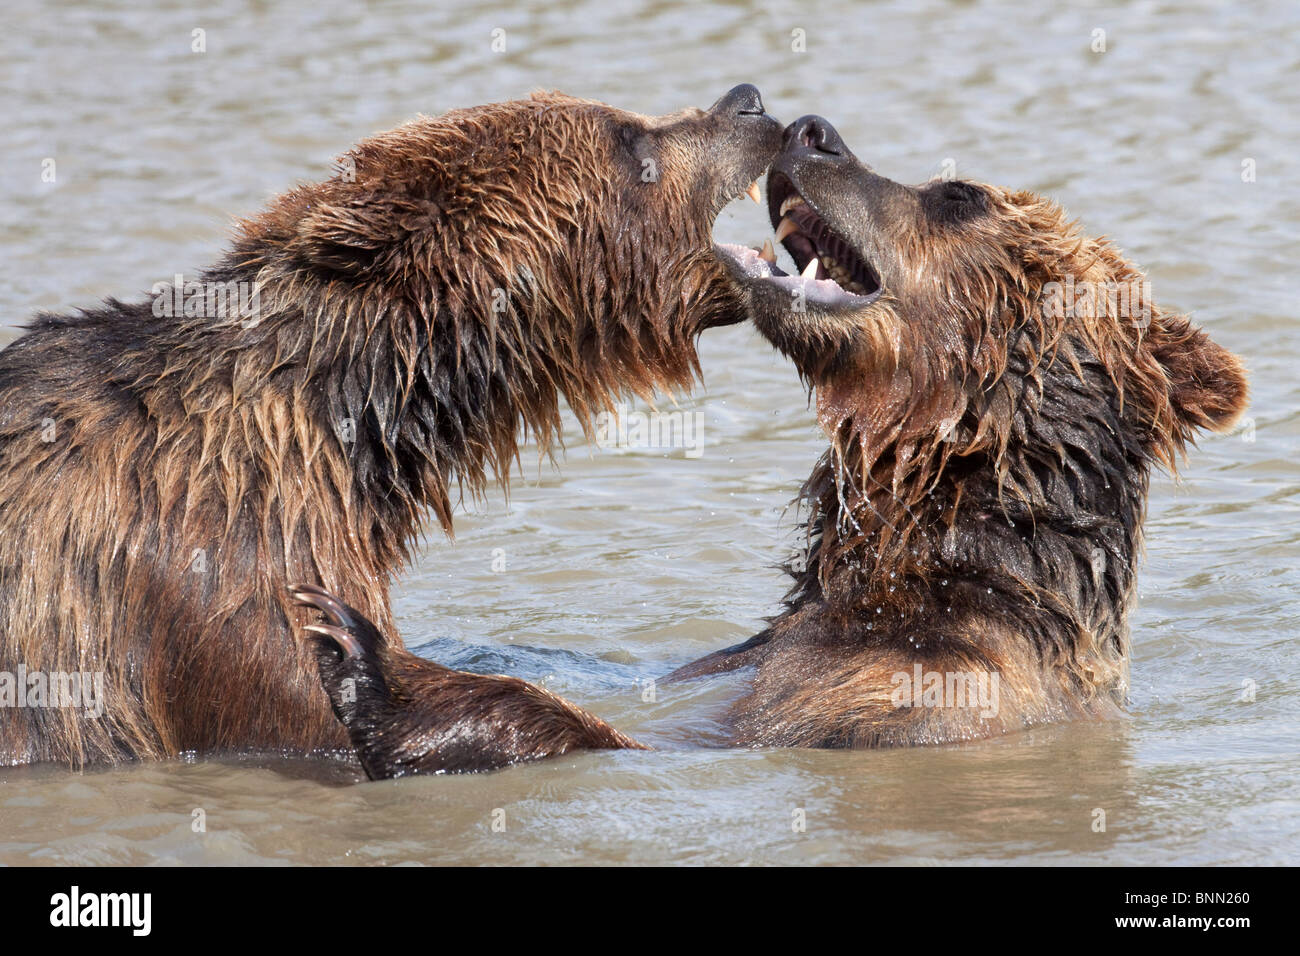 CAPTIVE: Two Grizzly play fight in the water of Turnagain Arm at the Alaska Wildlife Conservation Center, Alaska Stock Photo